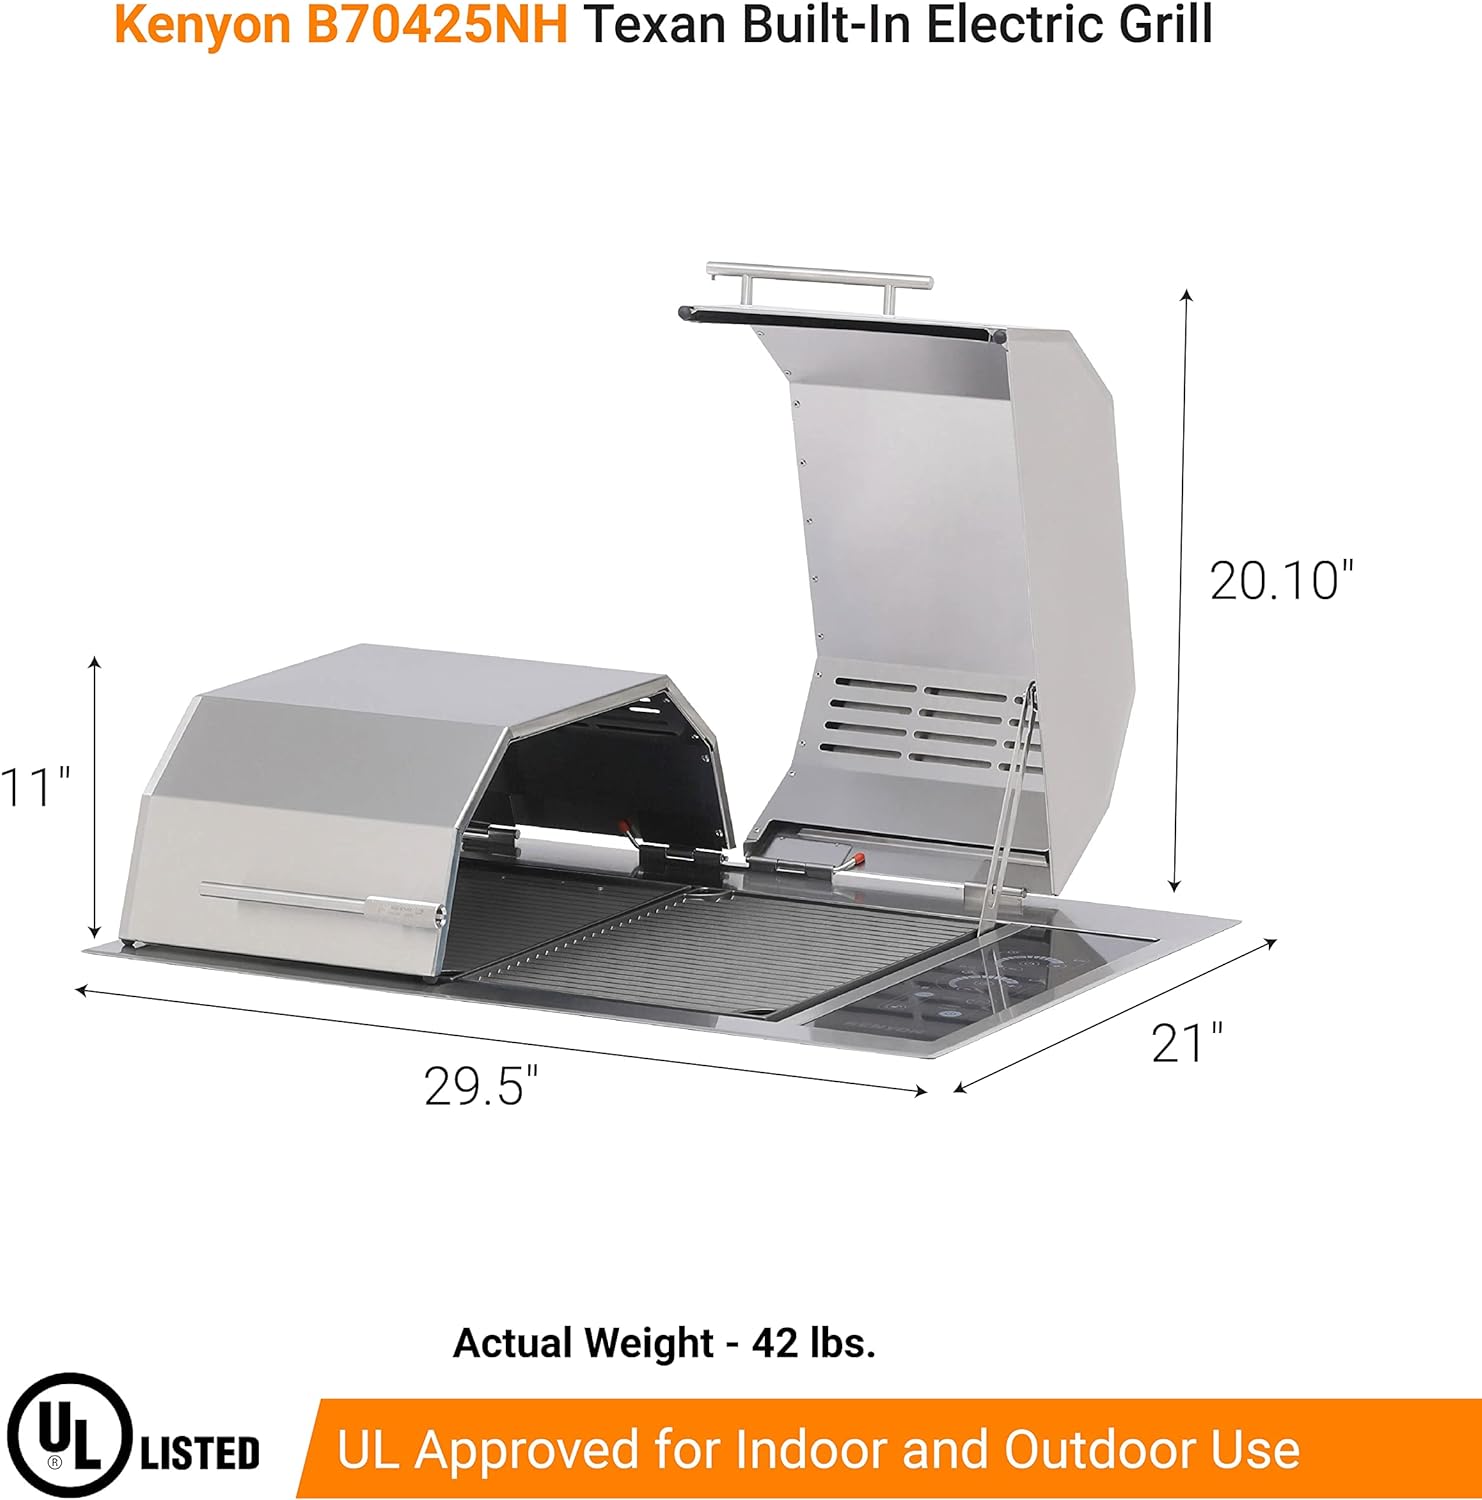 Kenyon Texan Built-In Electric Grill, UL-Approved For Indoor And Outdoor Use, Stainless Steel Body, Rust-Proof Grill, Quick Heat Up, Alternative For Gas And Charcoal Grill, Dishwasher Safe Grates - Kenyon Texan Built-In Electric Grill Review